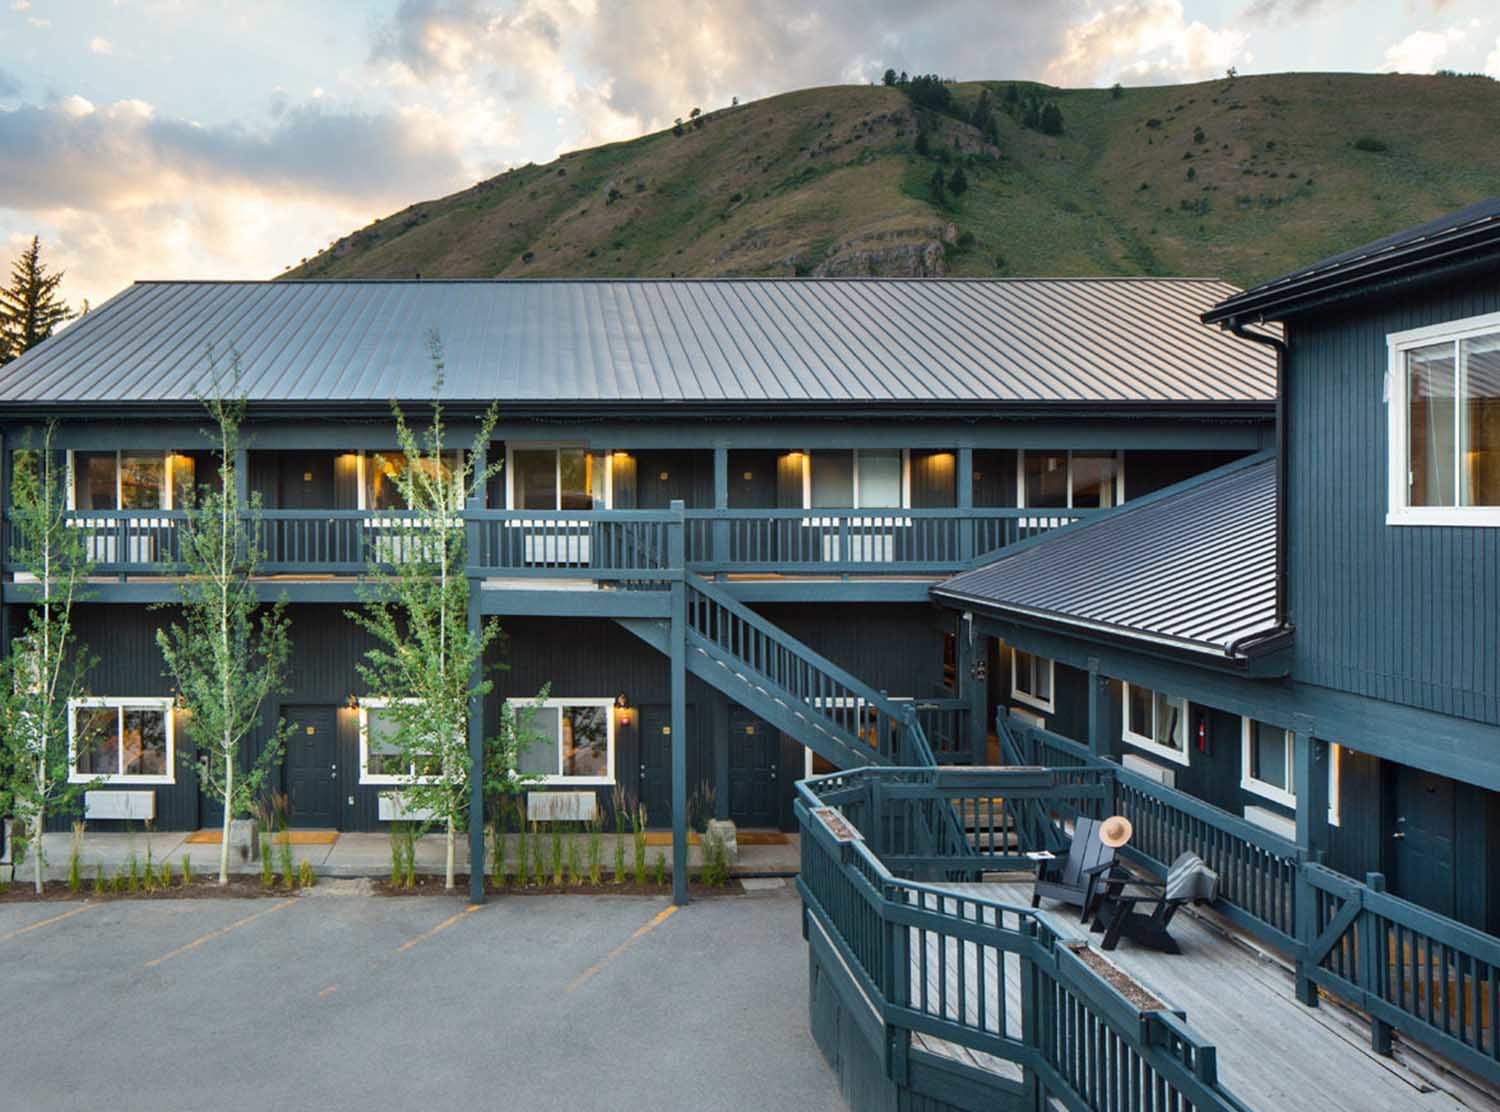 Anvil Hotel Breathtaking proximity to the Grand Teton Mountains, Yellowstone... what else is there?